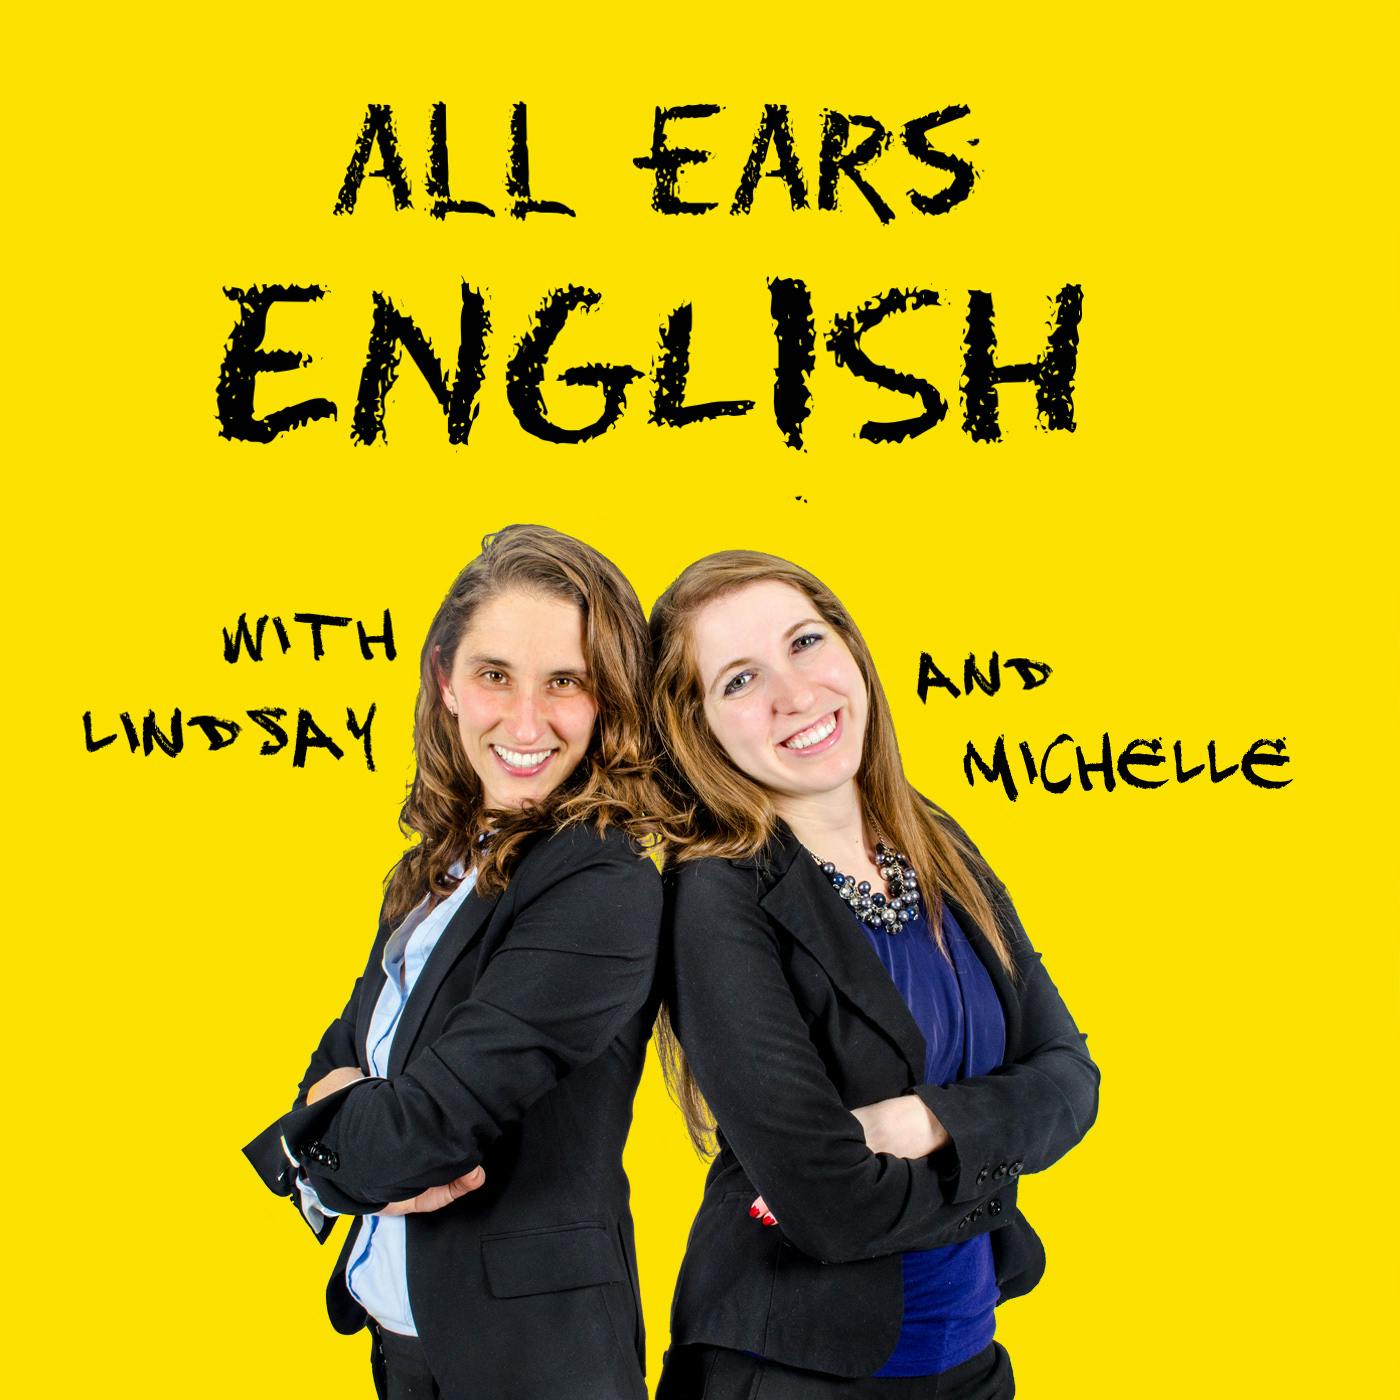 AEE 1194: That's Juicy! How to Comment on Gossip and More in English